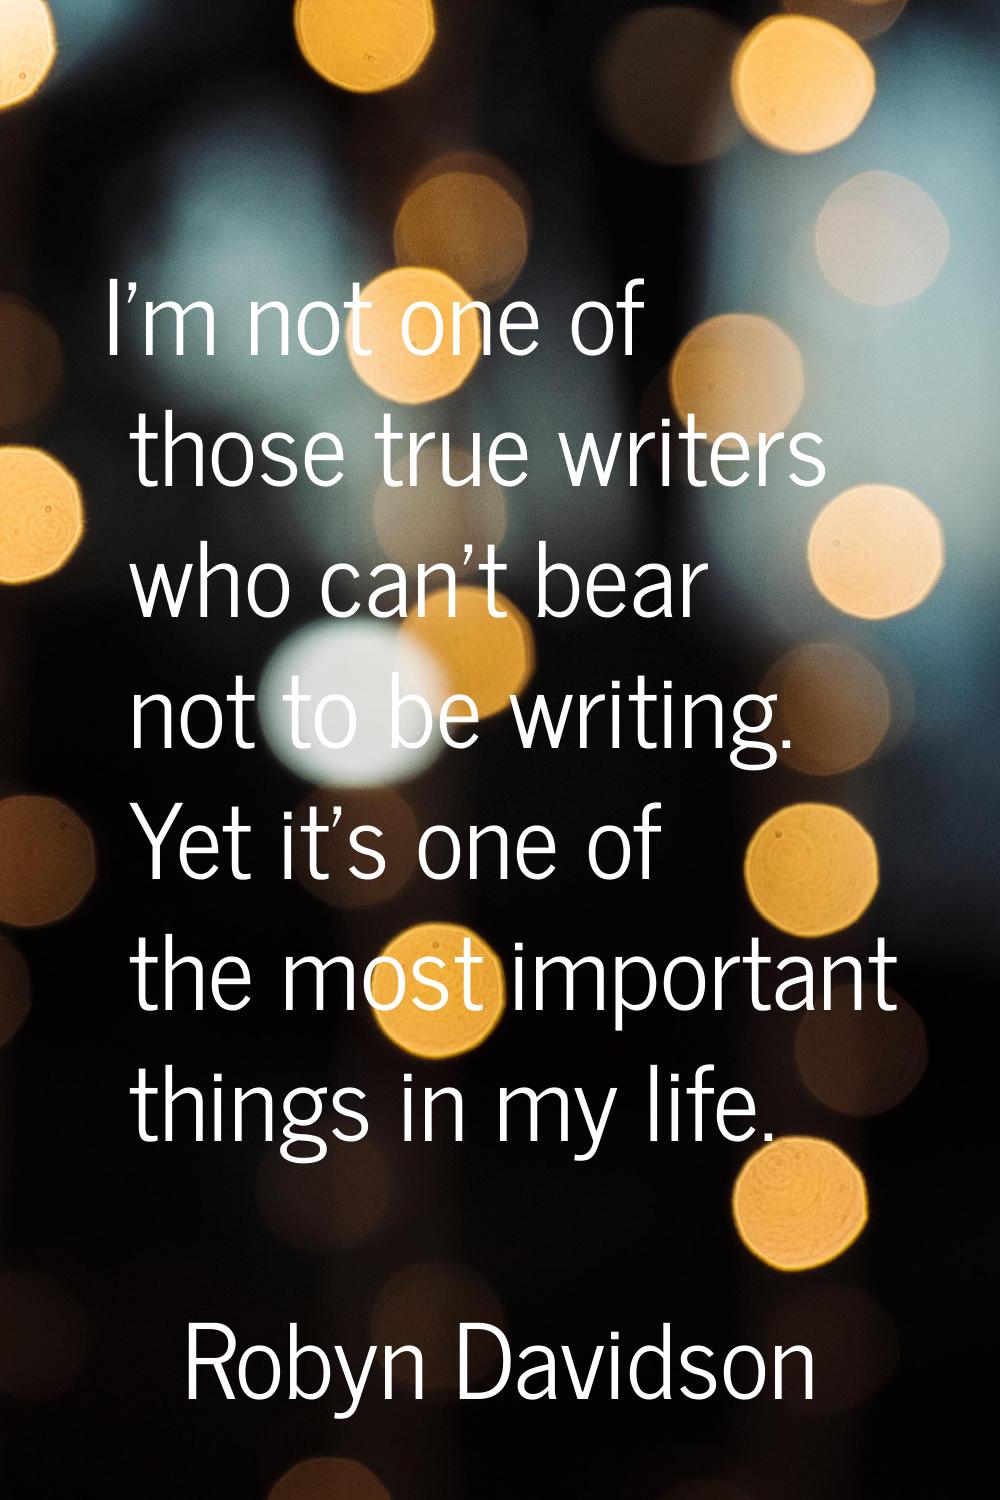 I'm not one of those true writers who can't bear not to be writing. Yet it's one of the most import